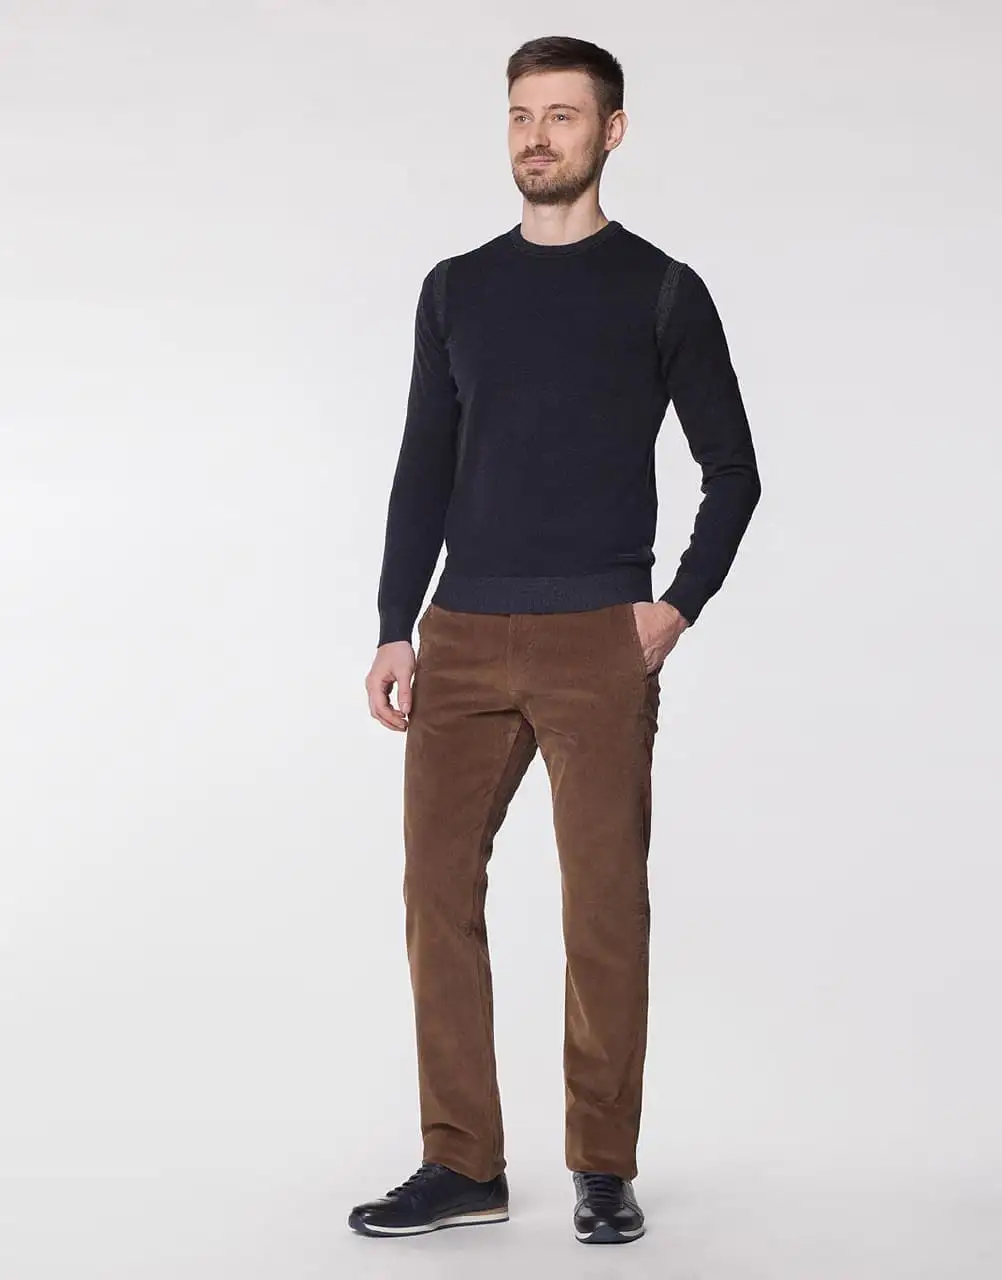 Pierre Cardin Mens Chino Trousers  Tobacco Parallel Import  Buy Online  in South Africa  takealotcom